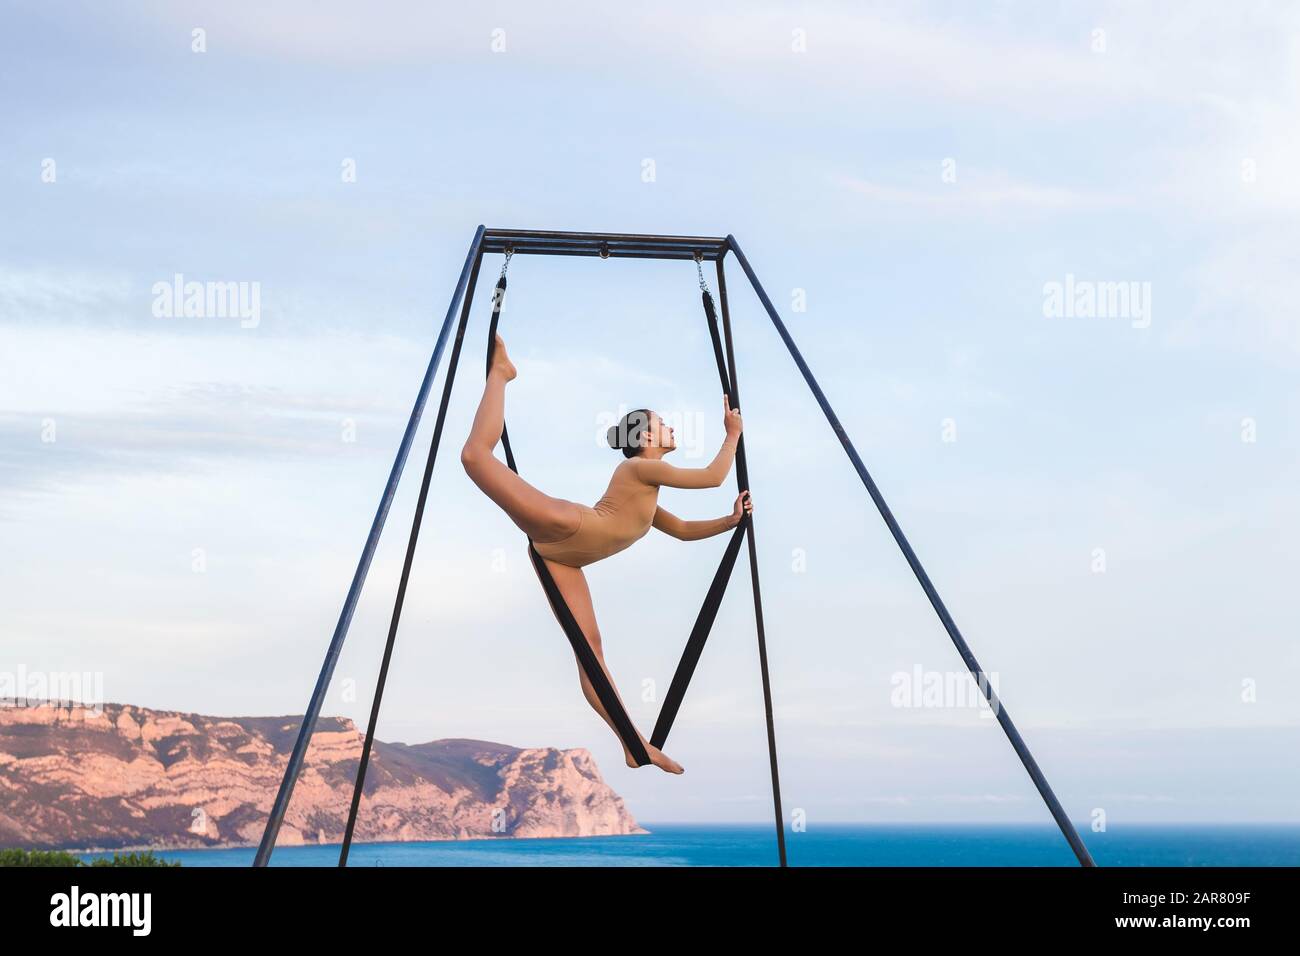 Acrobatic fly dance yoga outdoor with mountain view. Sports and healthy living concept Stock Photo